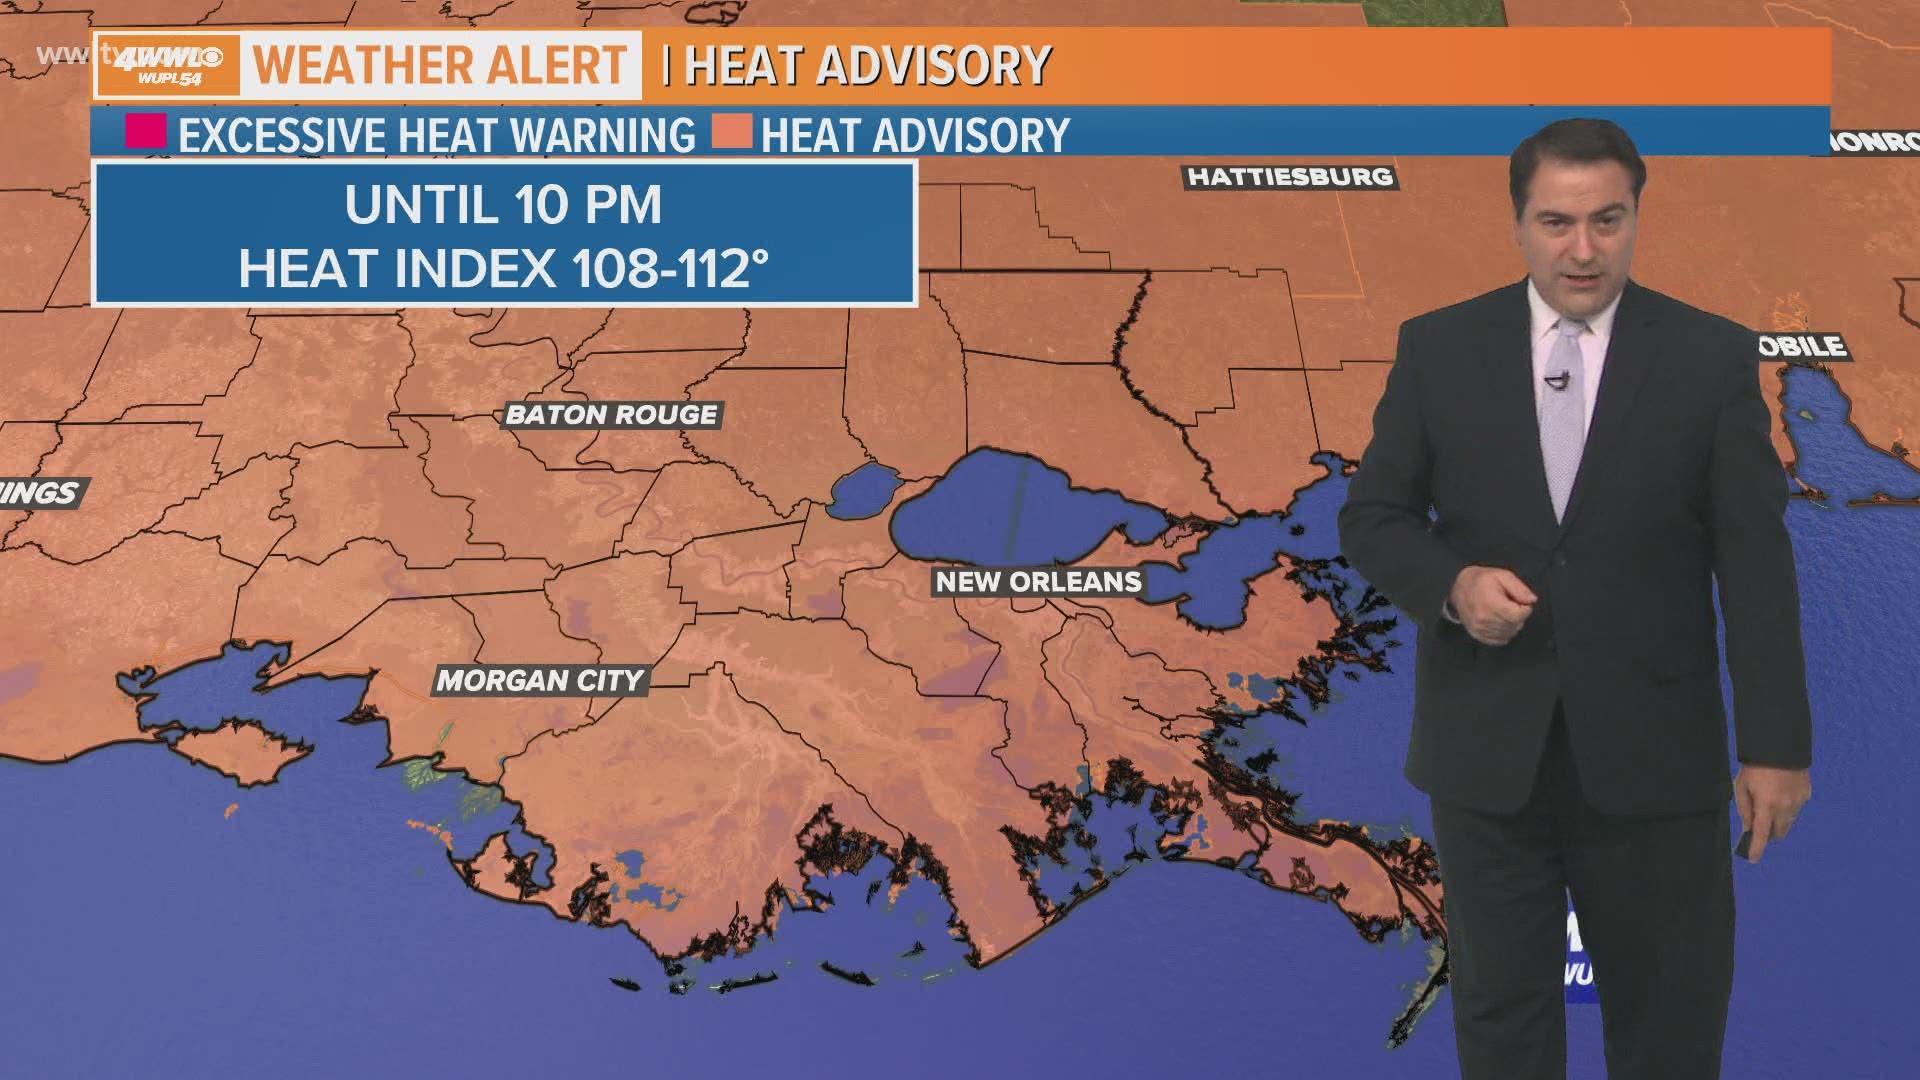 Meteorologist Dave Nussbaum says it will be very hot and humid with a heat advisory in effect today. More sweltering weather all weekend with a heat index 108-113°.